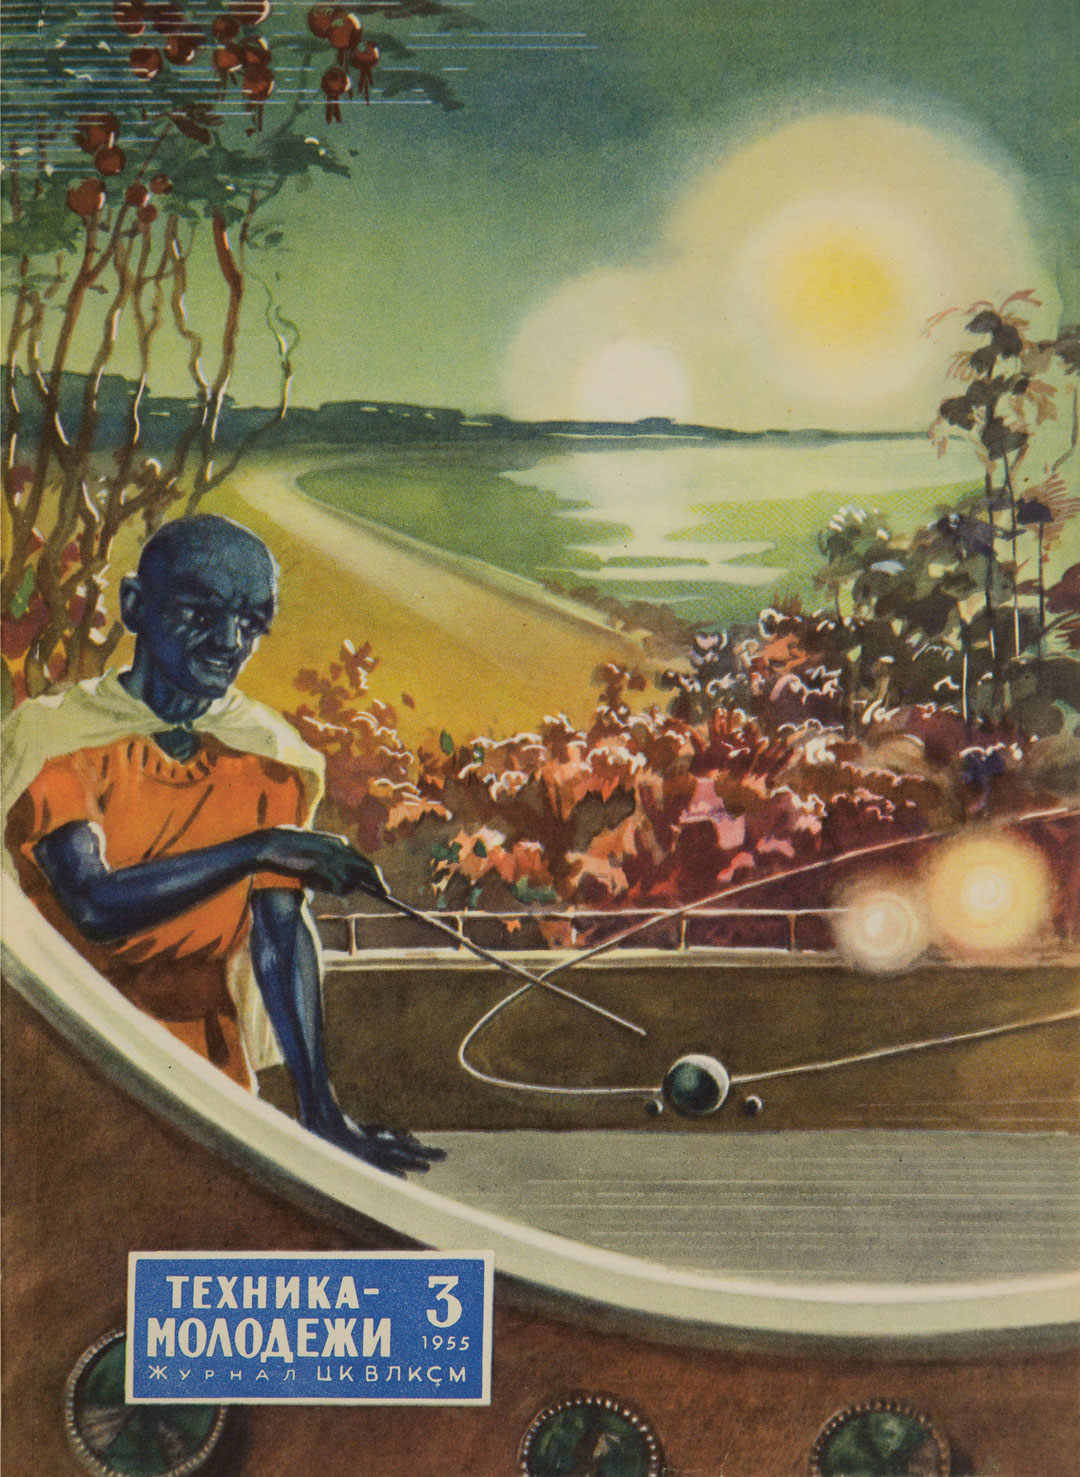 Young Technician, issue 10, 1964, illustration by R. Avotin for the article ‘Space Greenhouse’, which hypothesizes on the creation of an environment suitable for growing plants in space